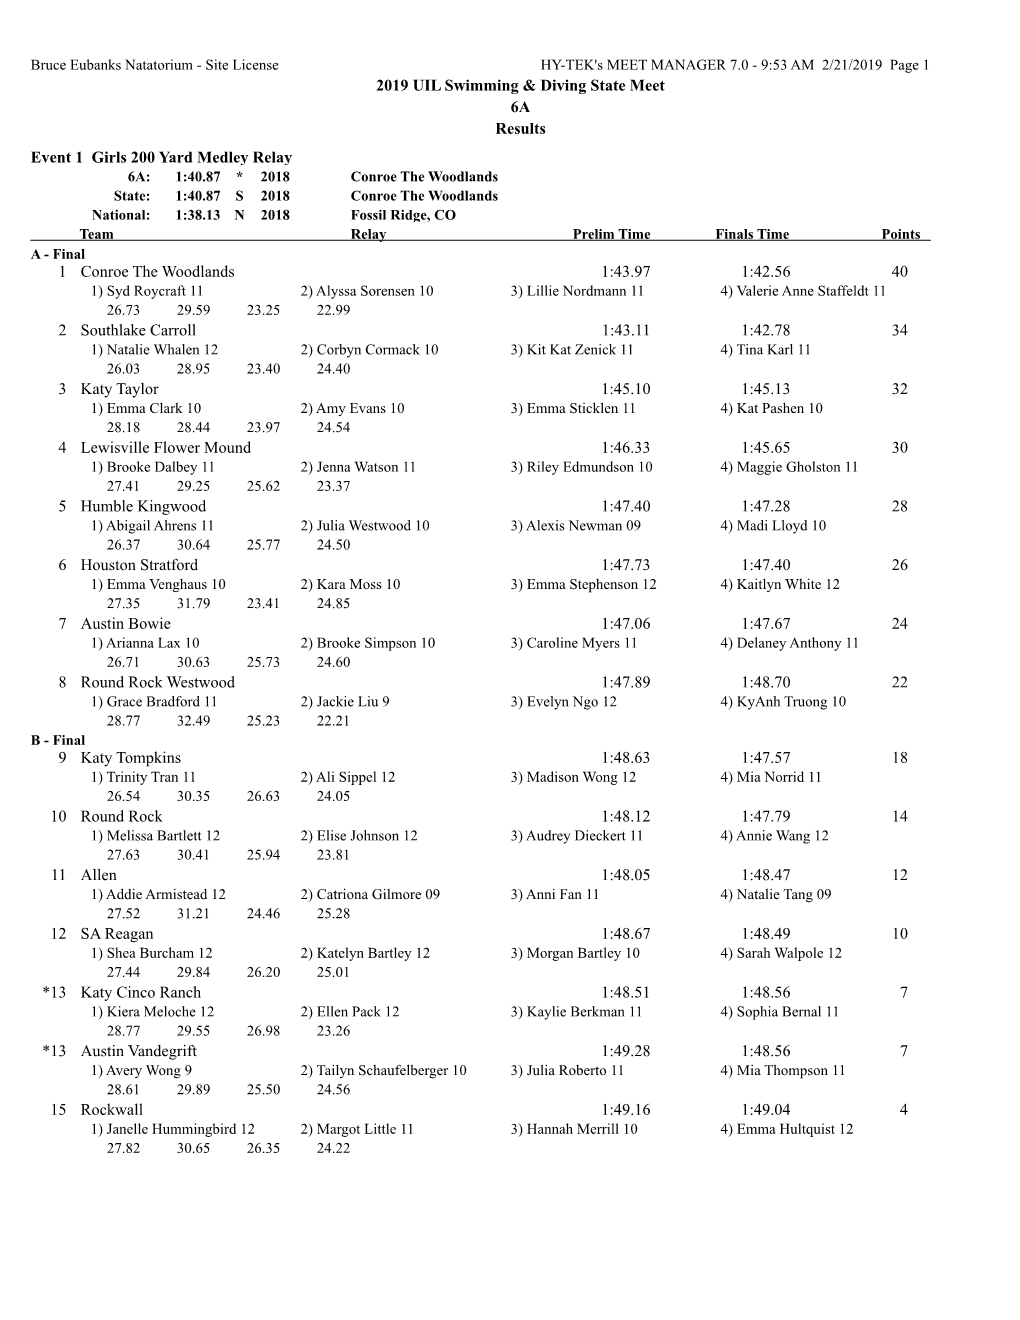 2019 UIL Swimming & Diving State Meet 6A Results Event 1 Girls 200